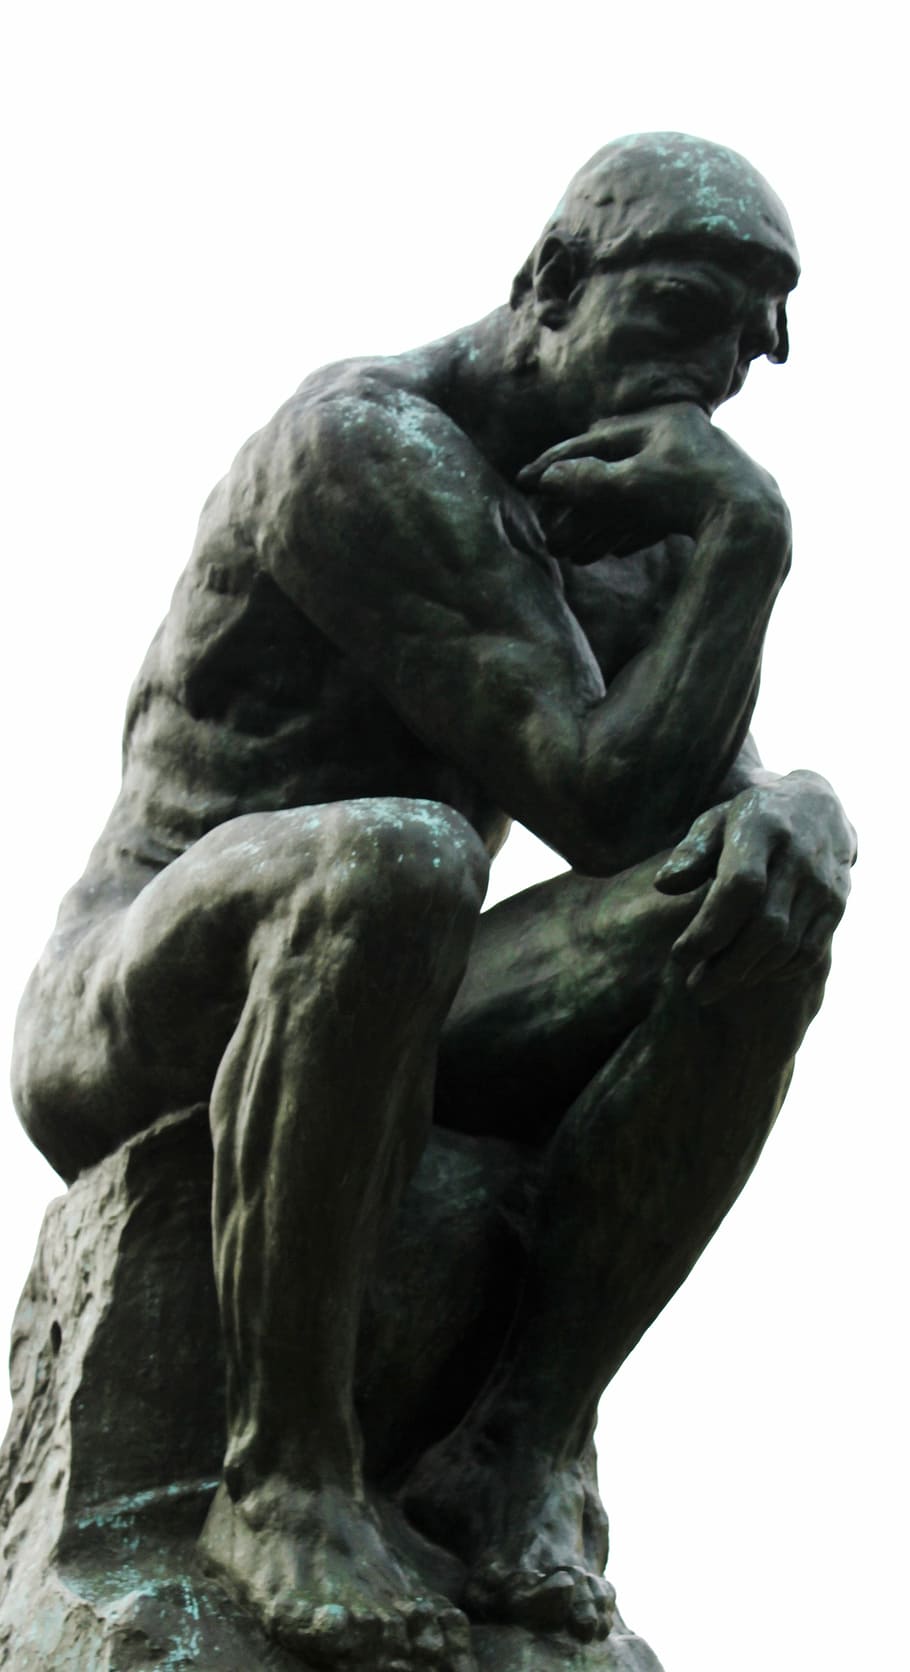 low-angle photography of sitting man statue during daytime, Thinker